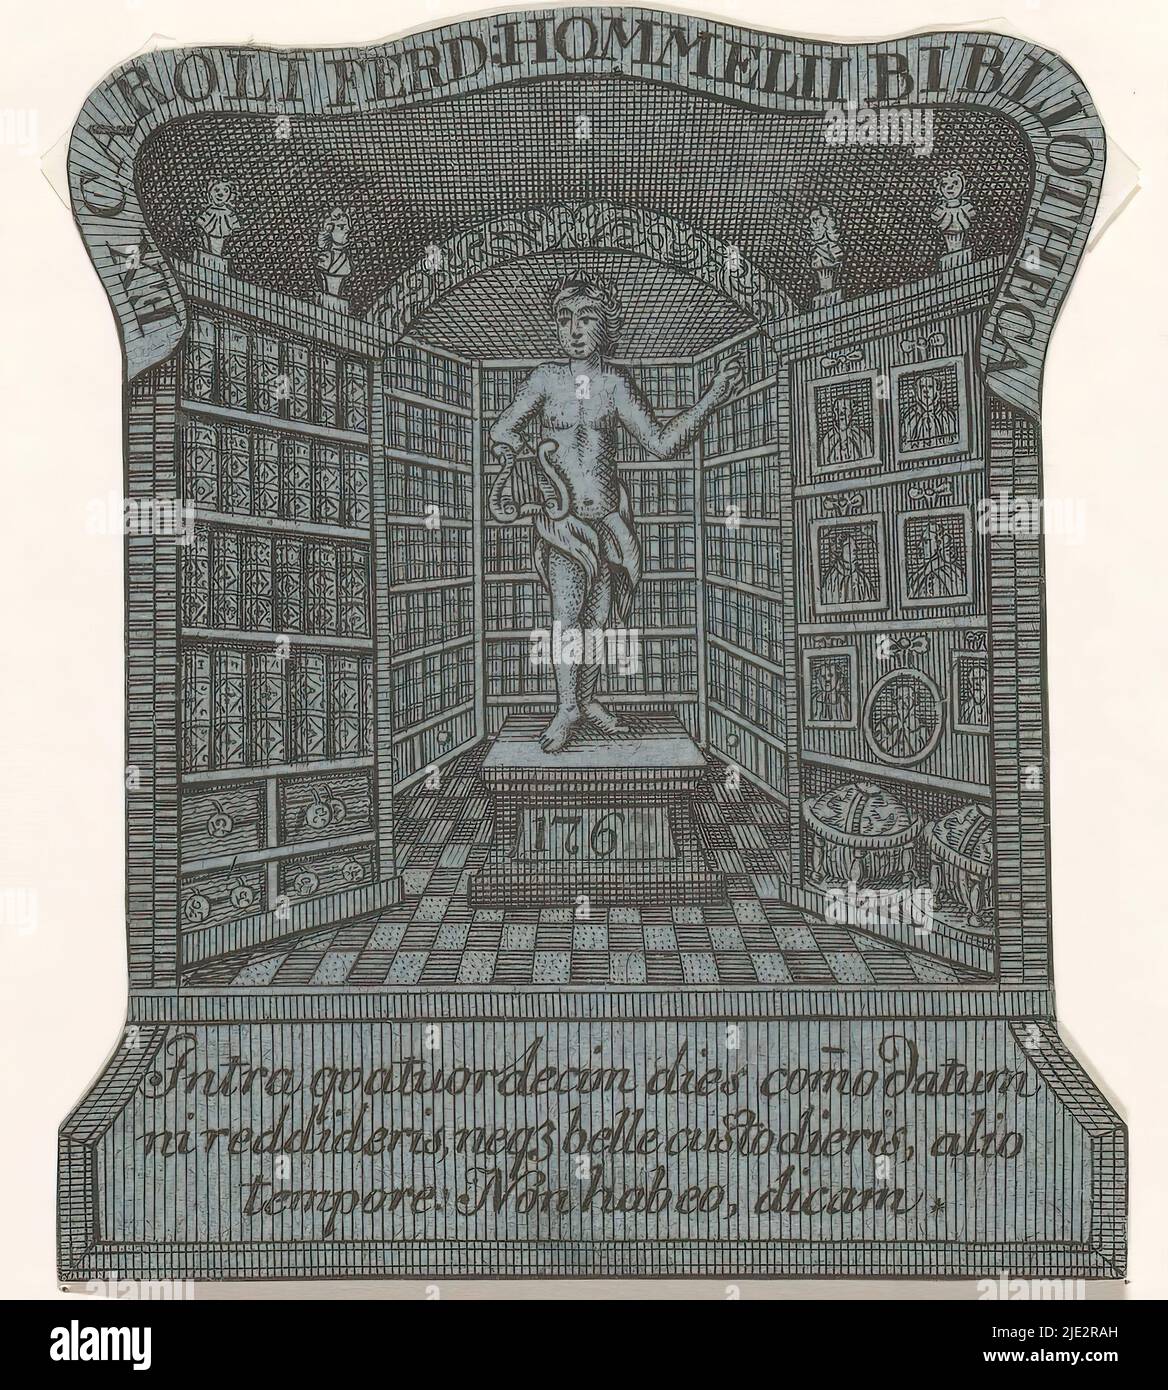 Ex libris of Karl Ferdinand Hommel, Ex Caroli Ferd. Hommelii Bibliotheca (title on object), Ex-libris of the German jurist Karl Ferdinand Hommel. In front of a bookcase is a statue of Apollo. Against the wall to the right a portrait collection and a shelf with two globes. Below a three-line motto in Latin., print maker: anonymous, 1767, paper, etching, engraving, snipping, height 82 mm × width 69 mm Stock Photo